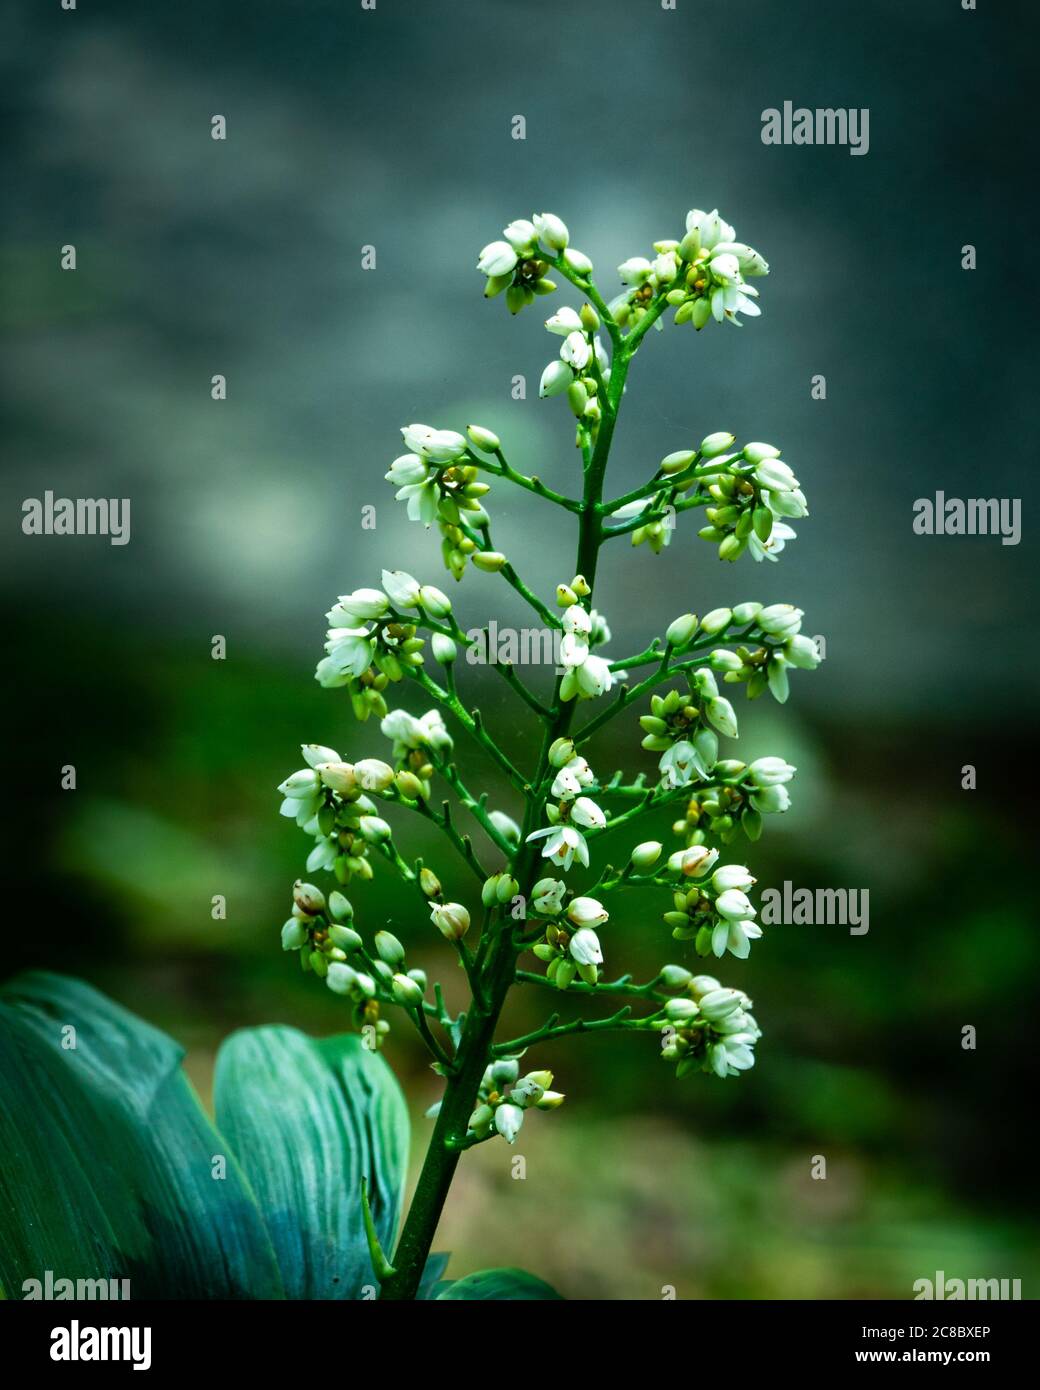 White small flowers with dark background and the feel of monsoon Stock Photo